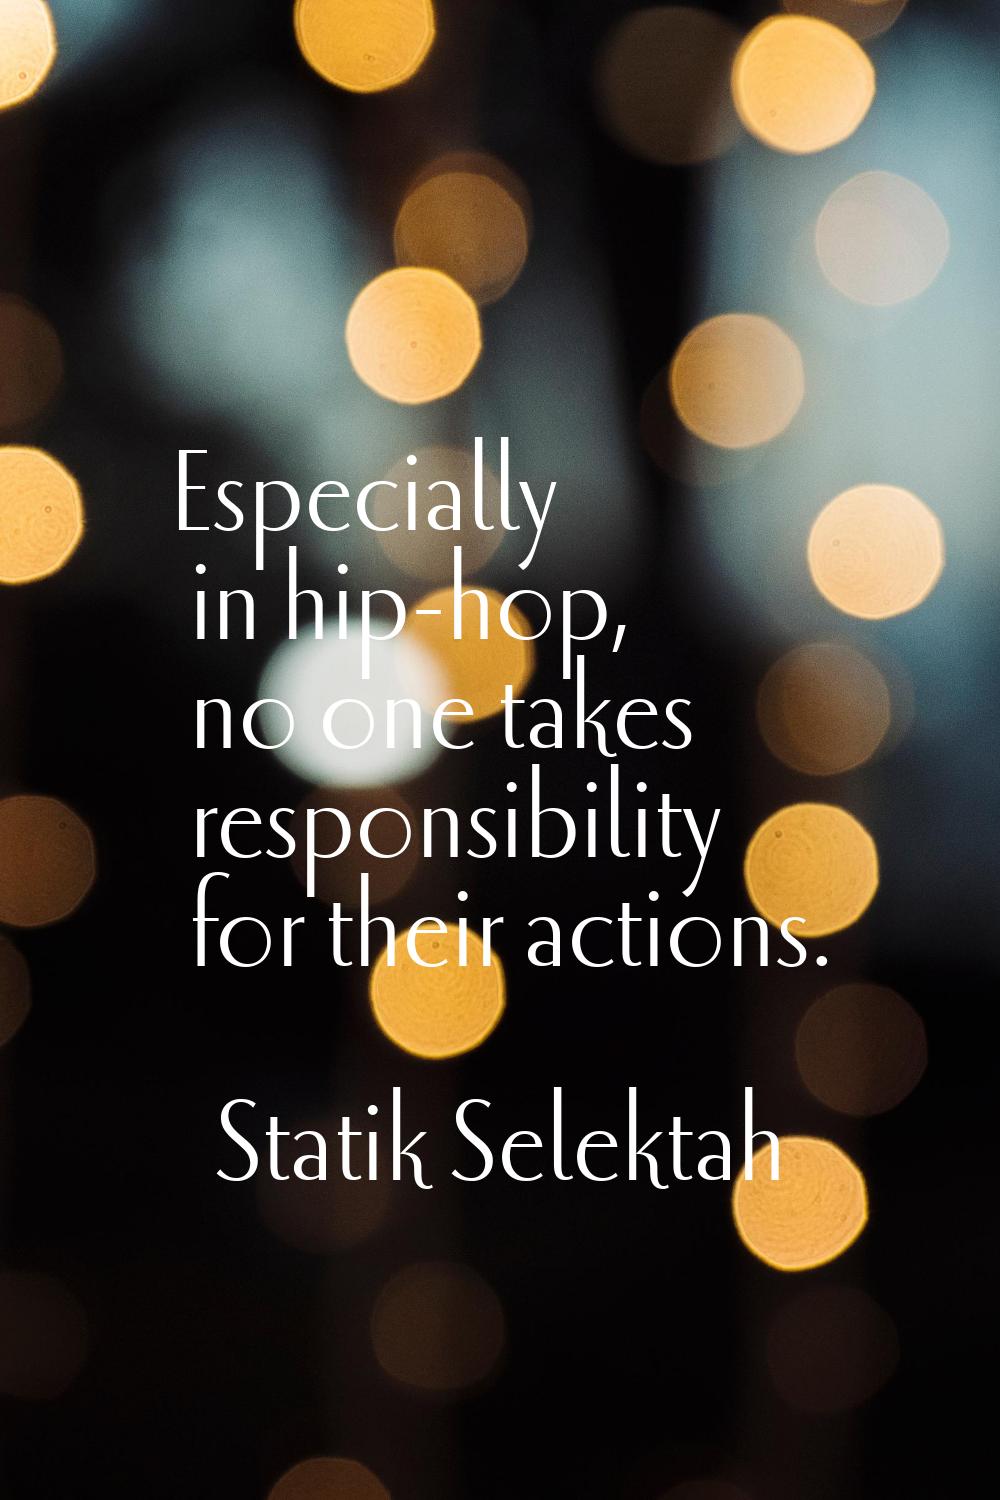 Especially in hip-hop, no one takes responsibility for their actions.